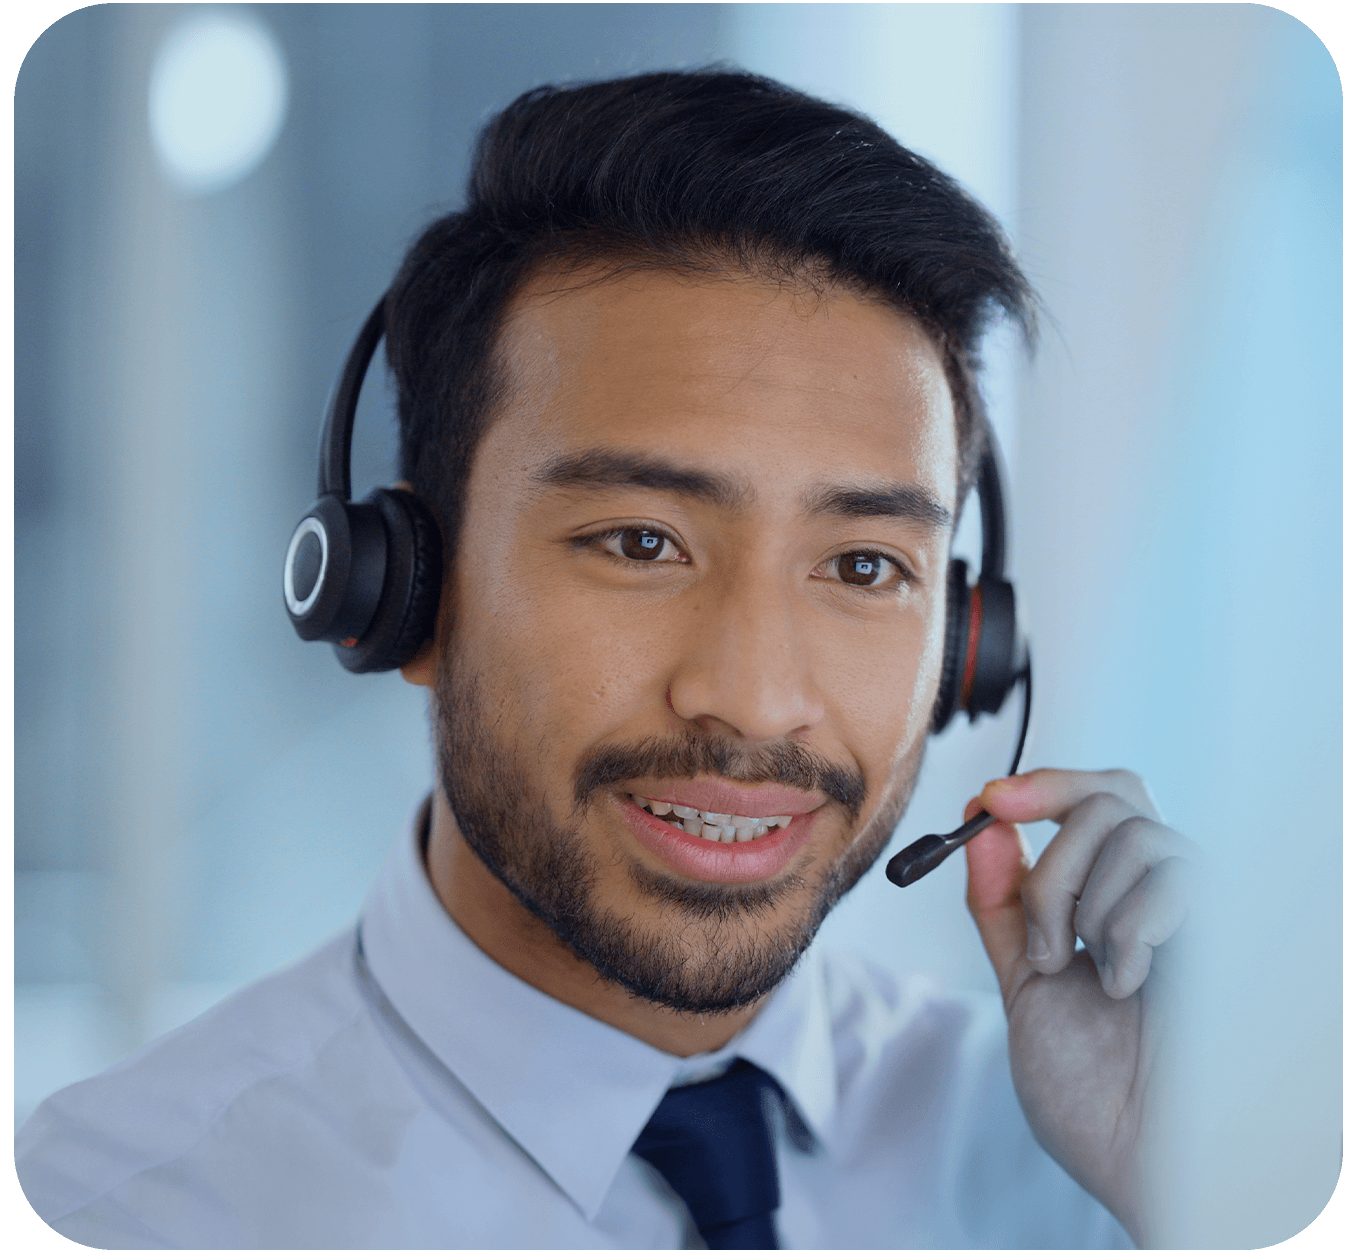 A remote customer support agent with a headset, smiling.